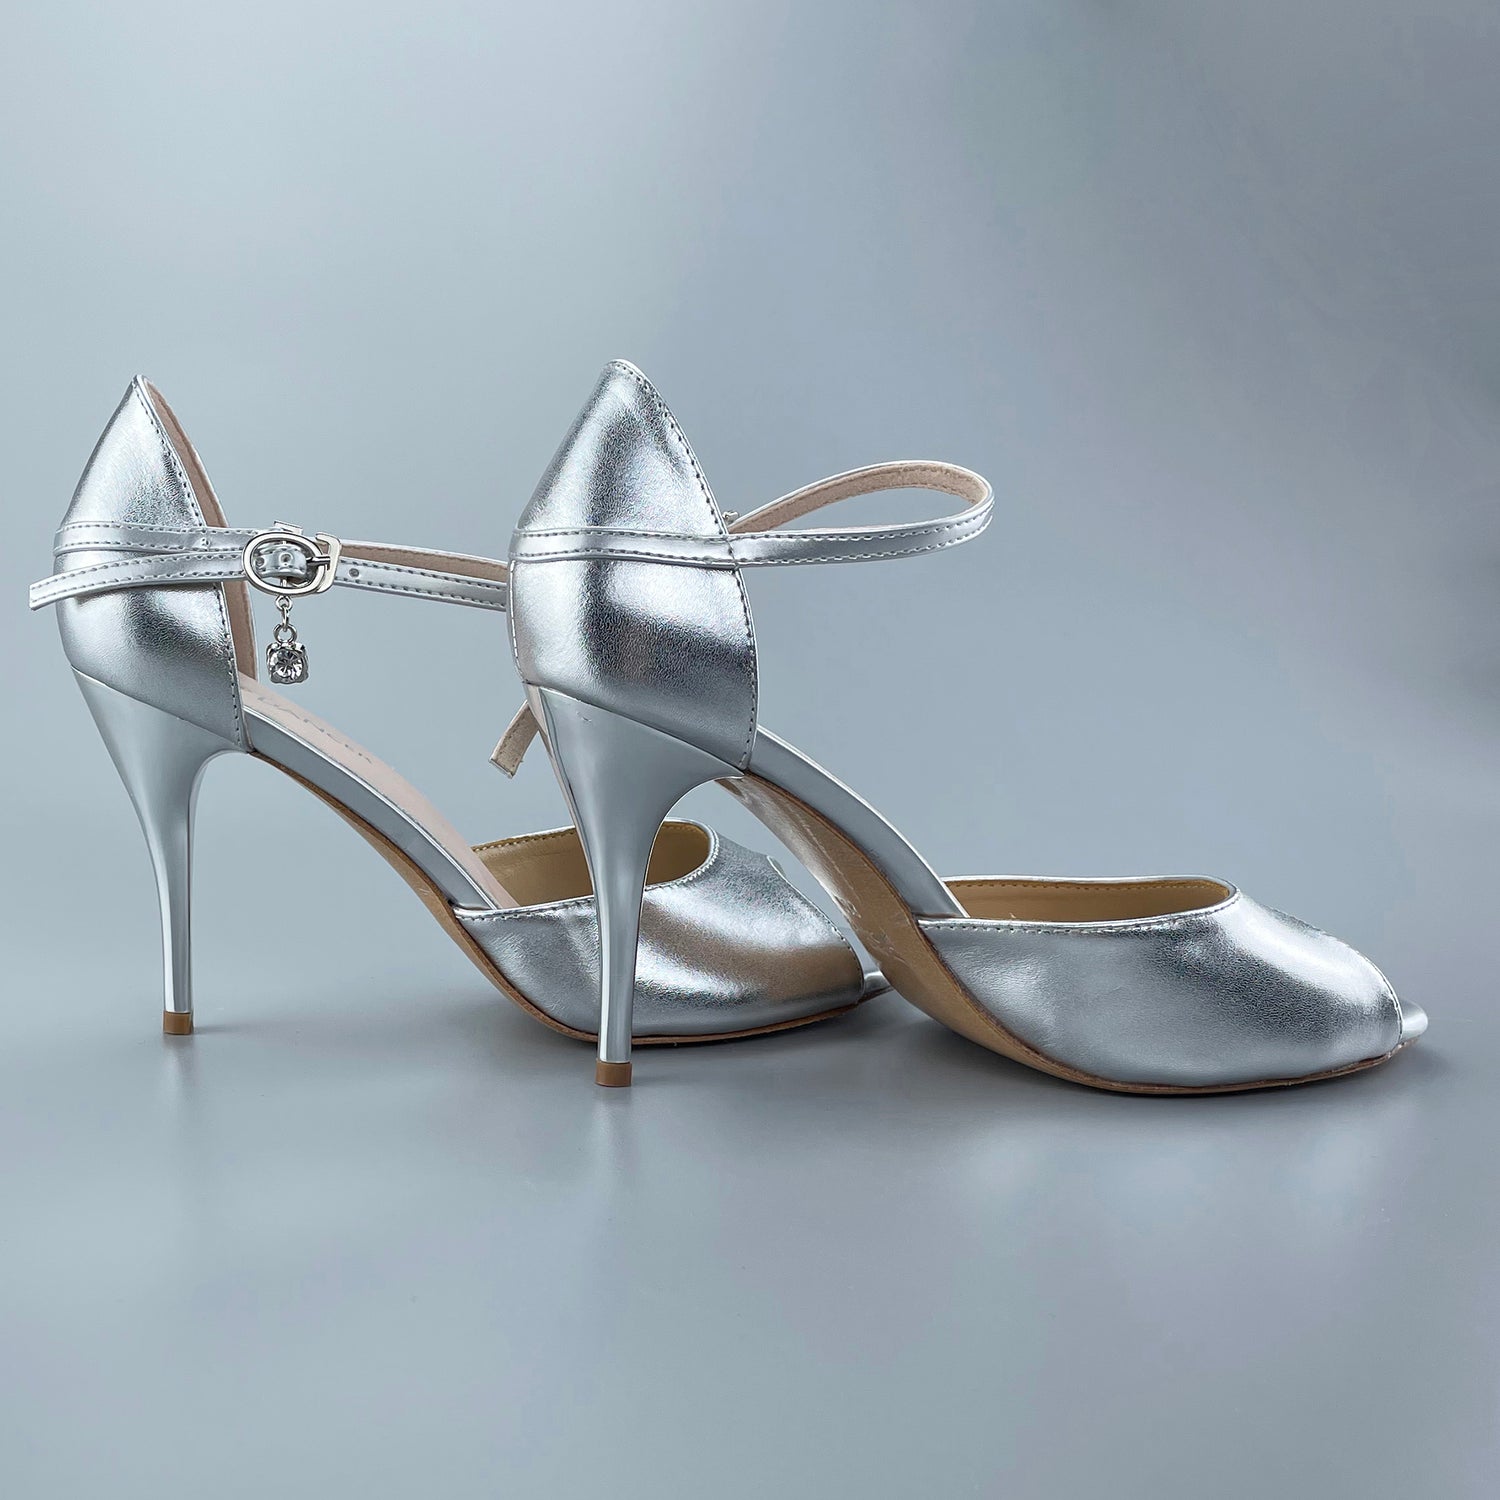 Pro Dancer Tango Shoes silver open-toe salsa heels with leather sole5